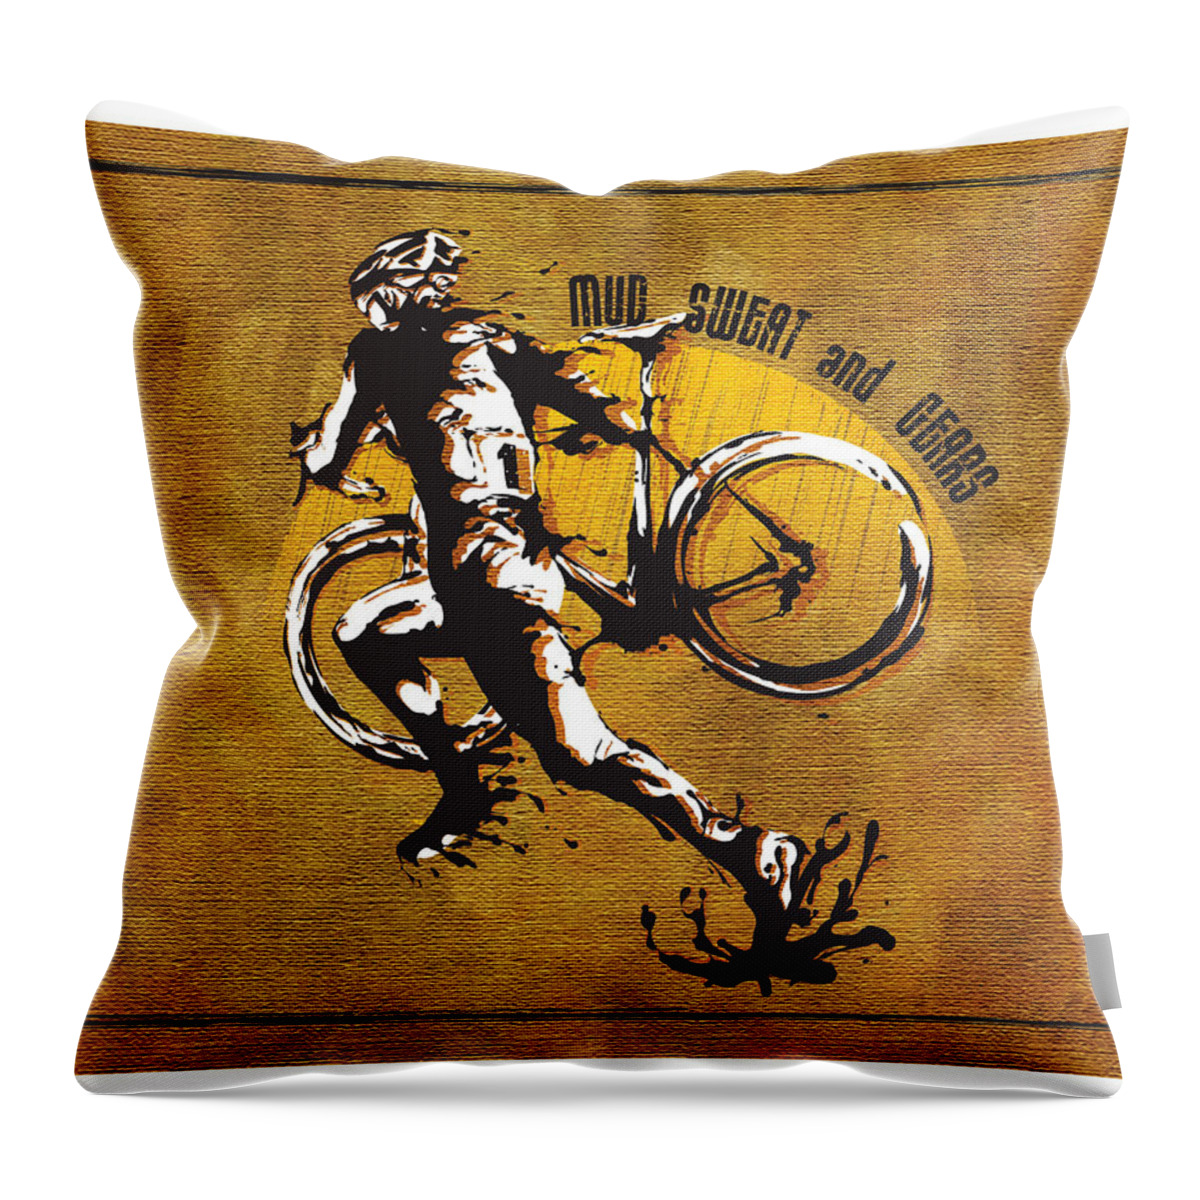 Cyclocross Illustration Throw Pillow featuring the painting Mud Sweat And Gears by Sassan Filsoof